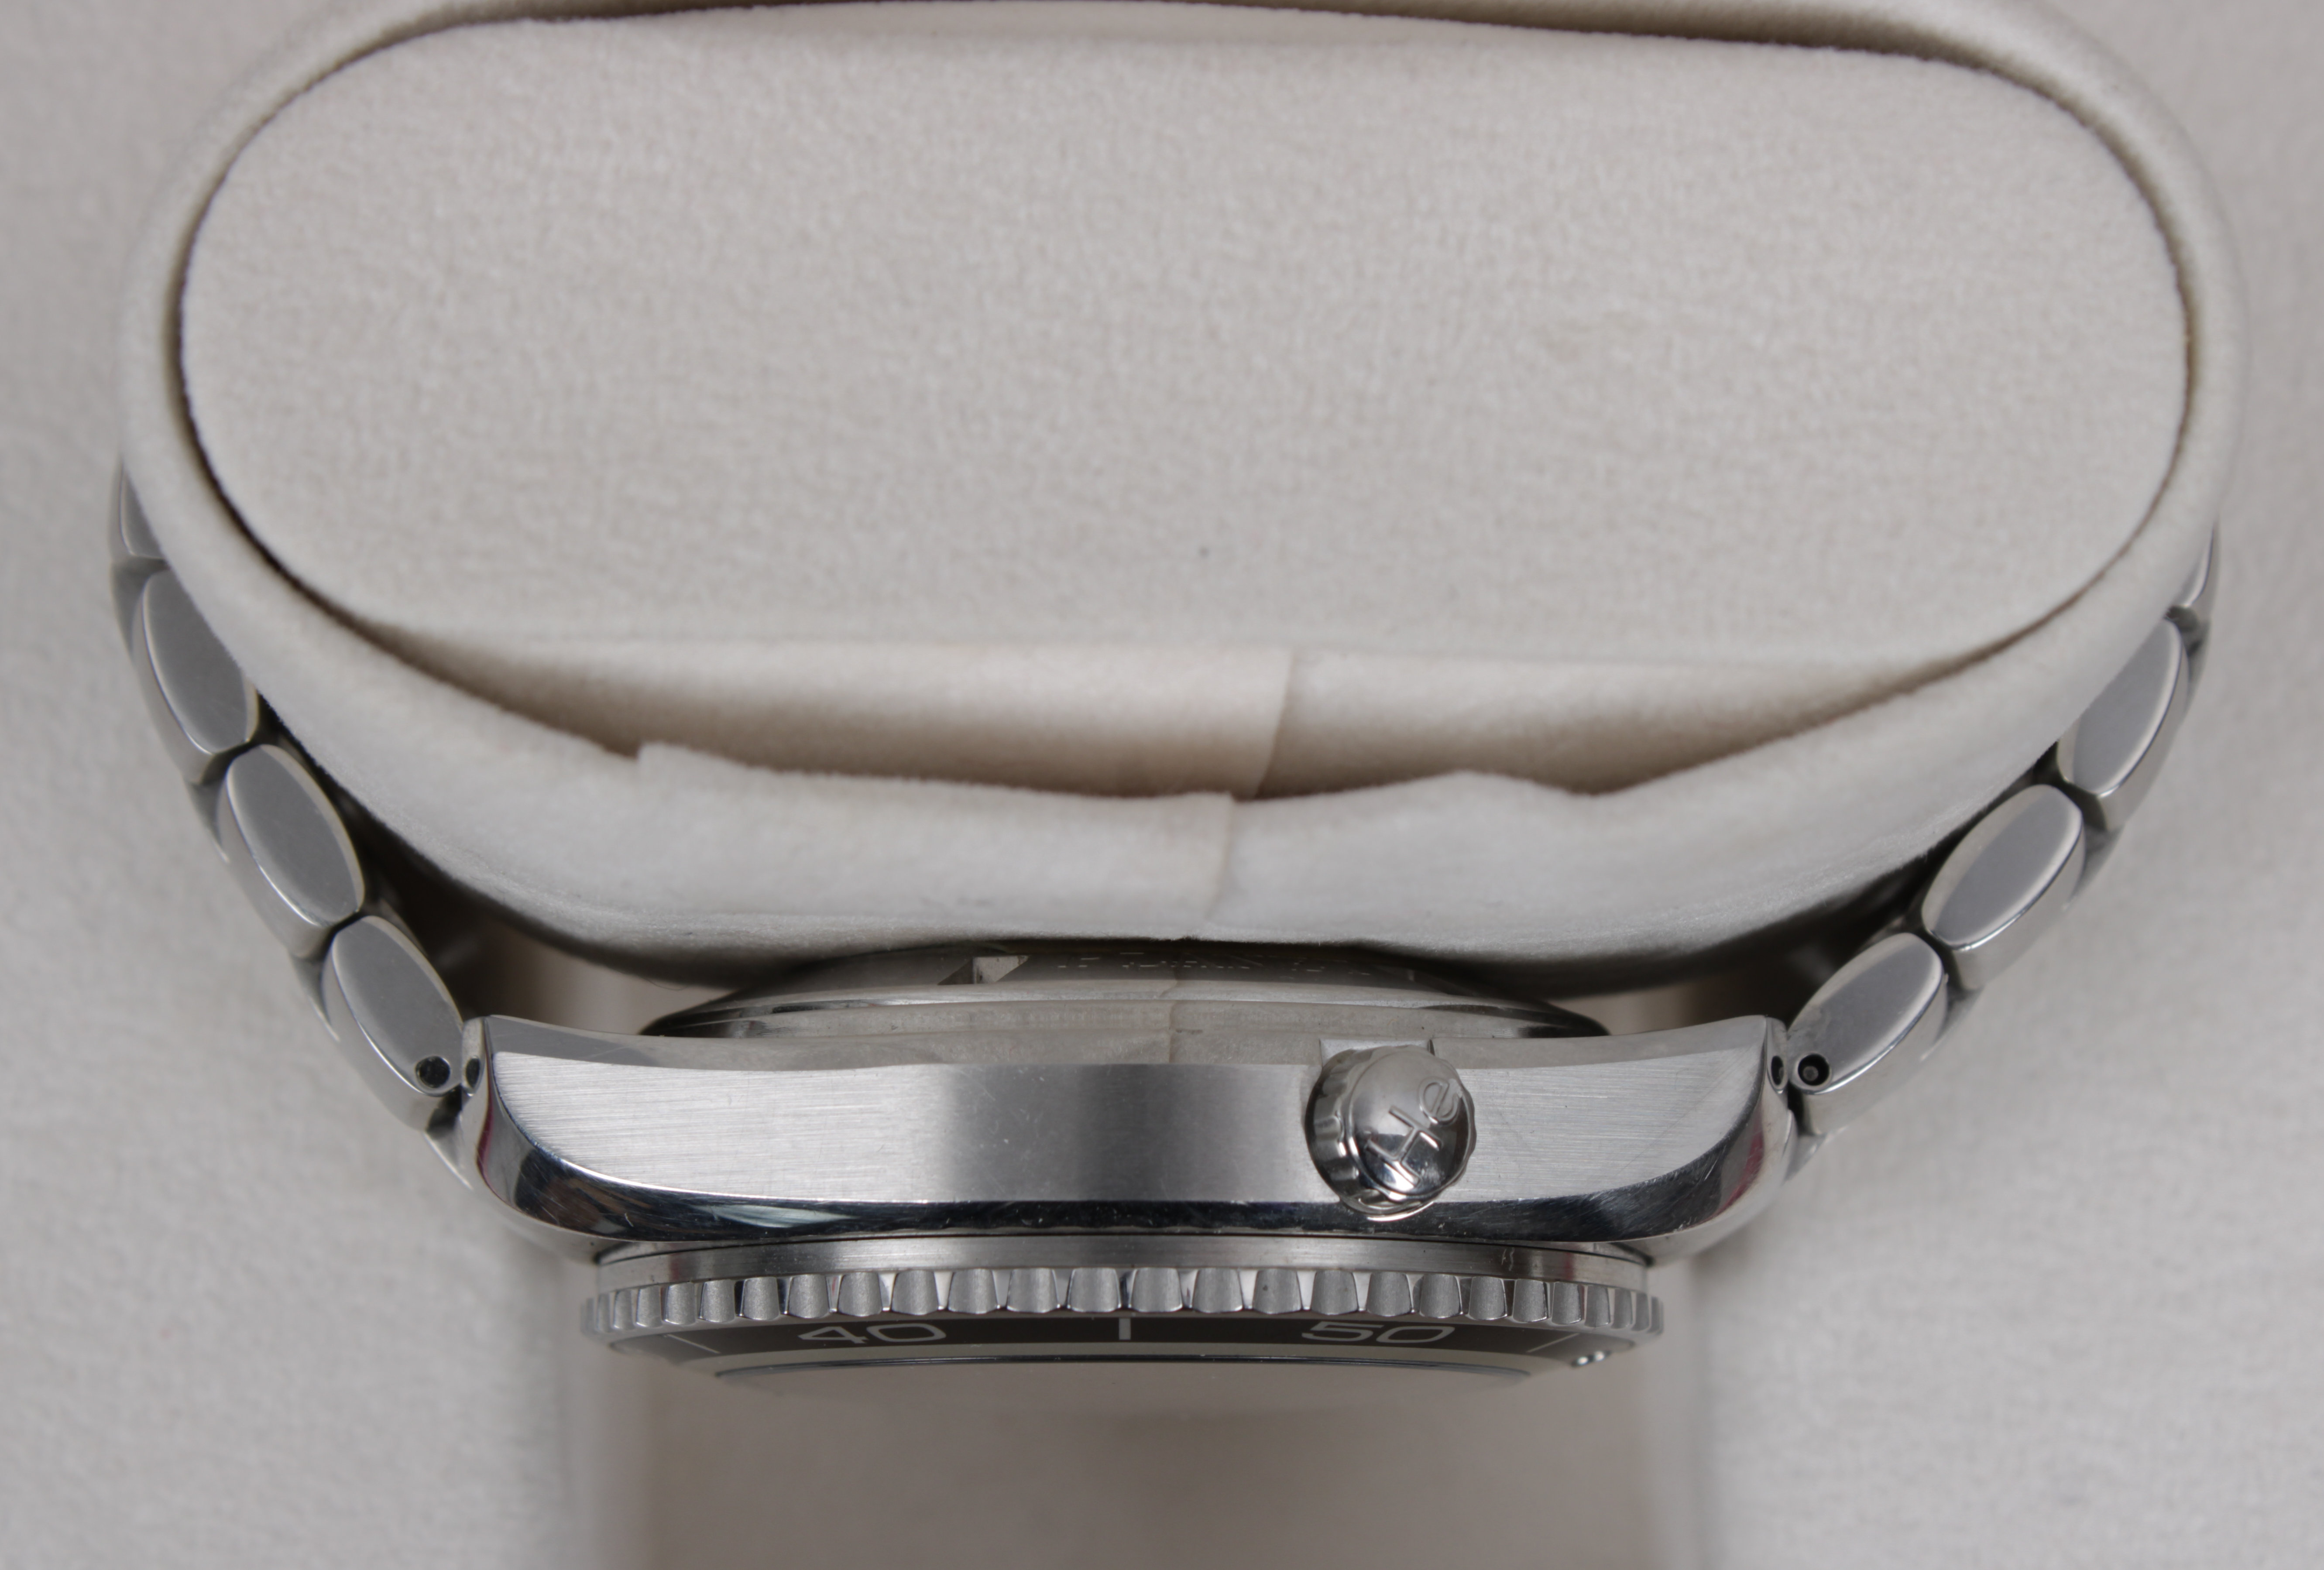 Omega Seamaster co-axial chronograph wristwatch - Image 4 of 9